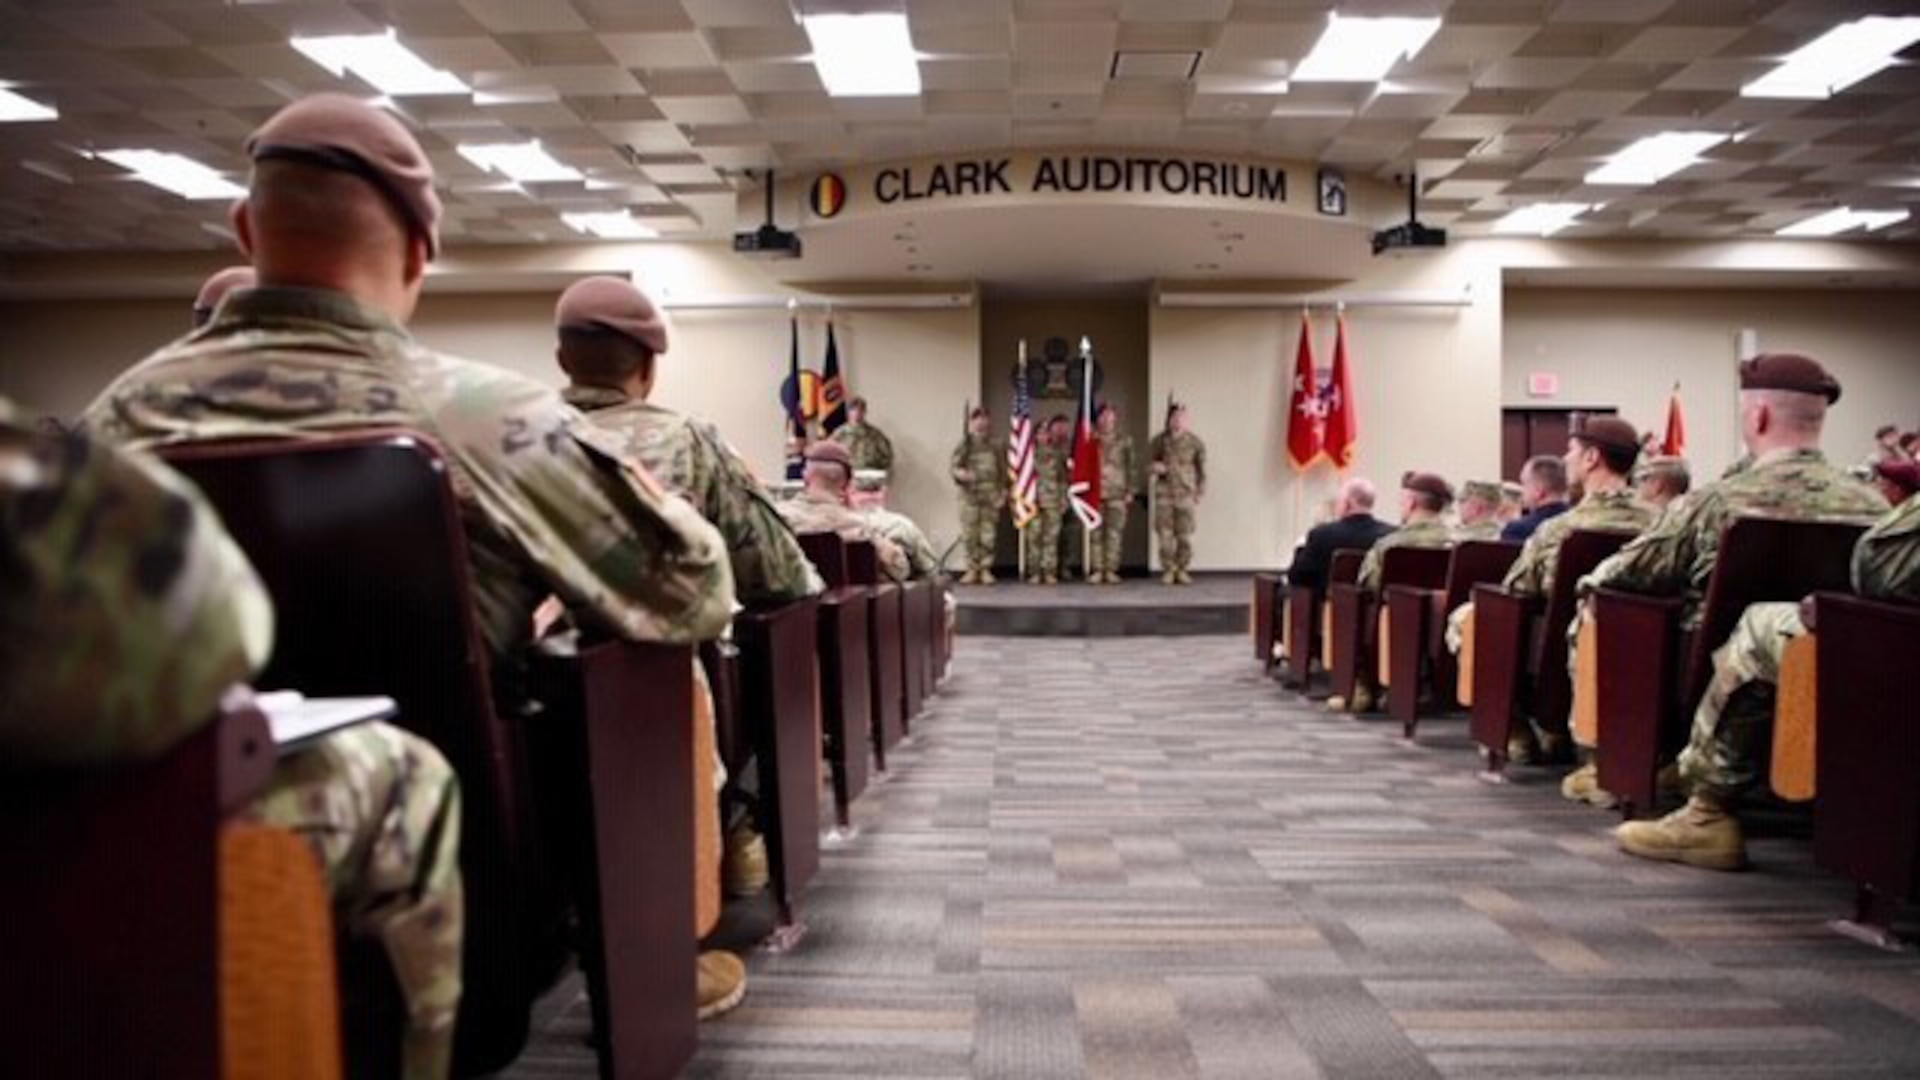 The 54th Security Force Assistance Brigade (SFAB) was recognized and activated by the U.S. Army during an official ceremony at Fort Bragg, N.C., Mar. 5, 2020.